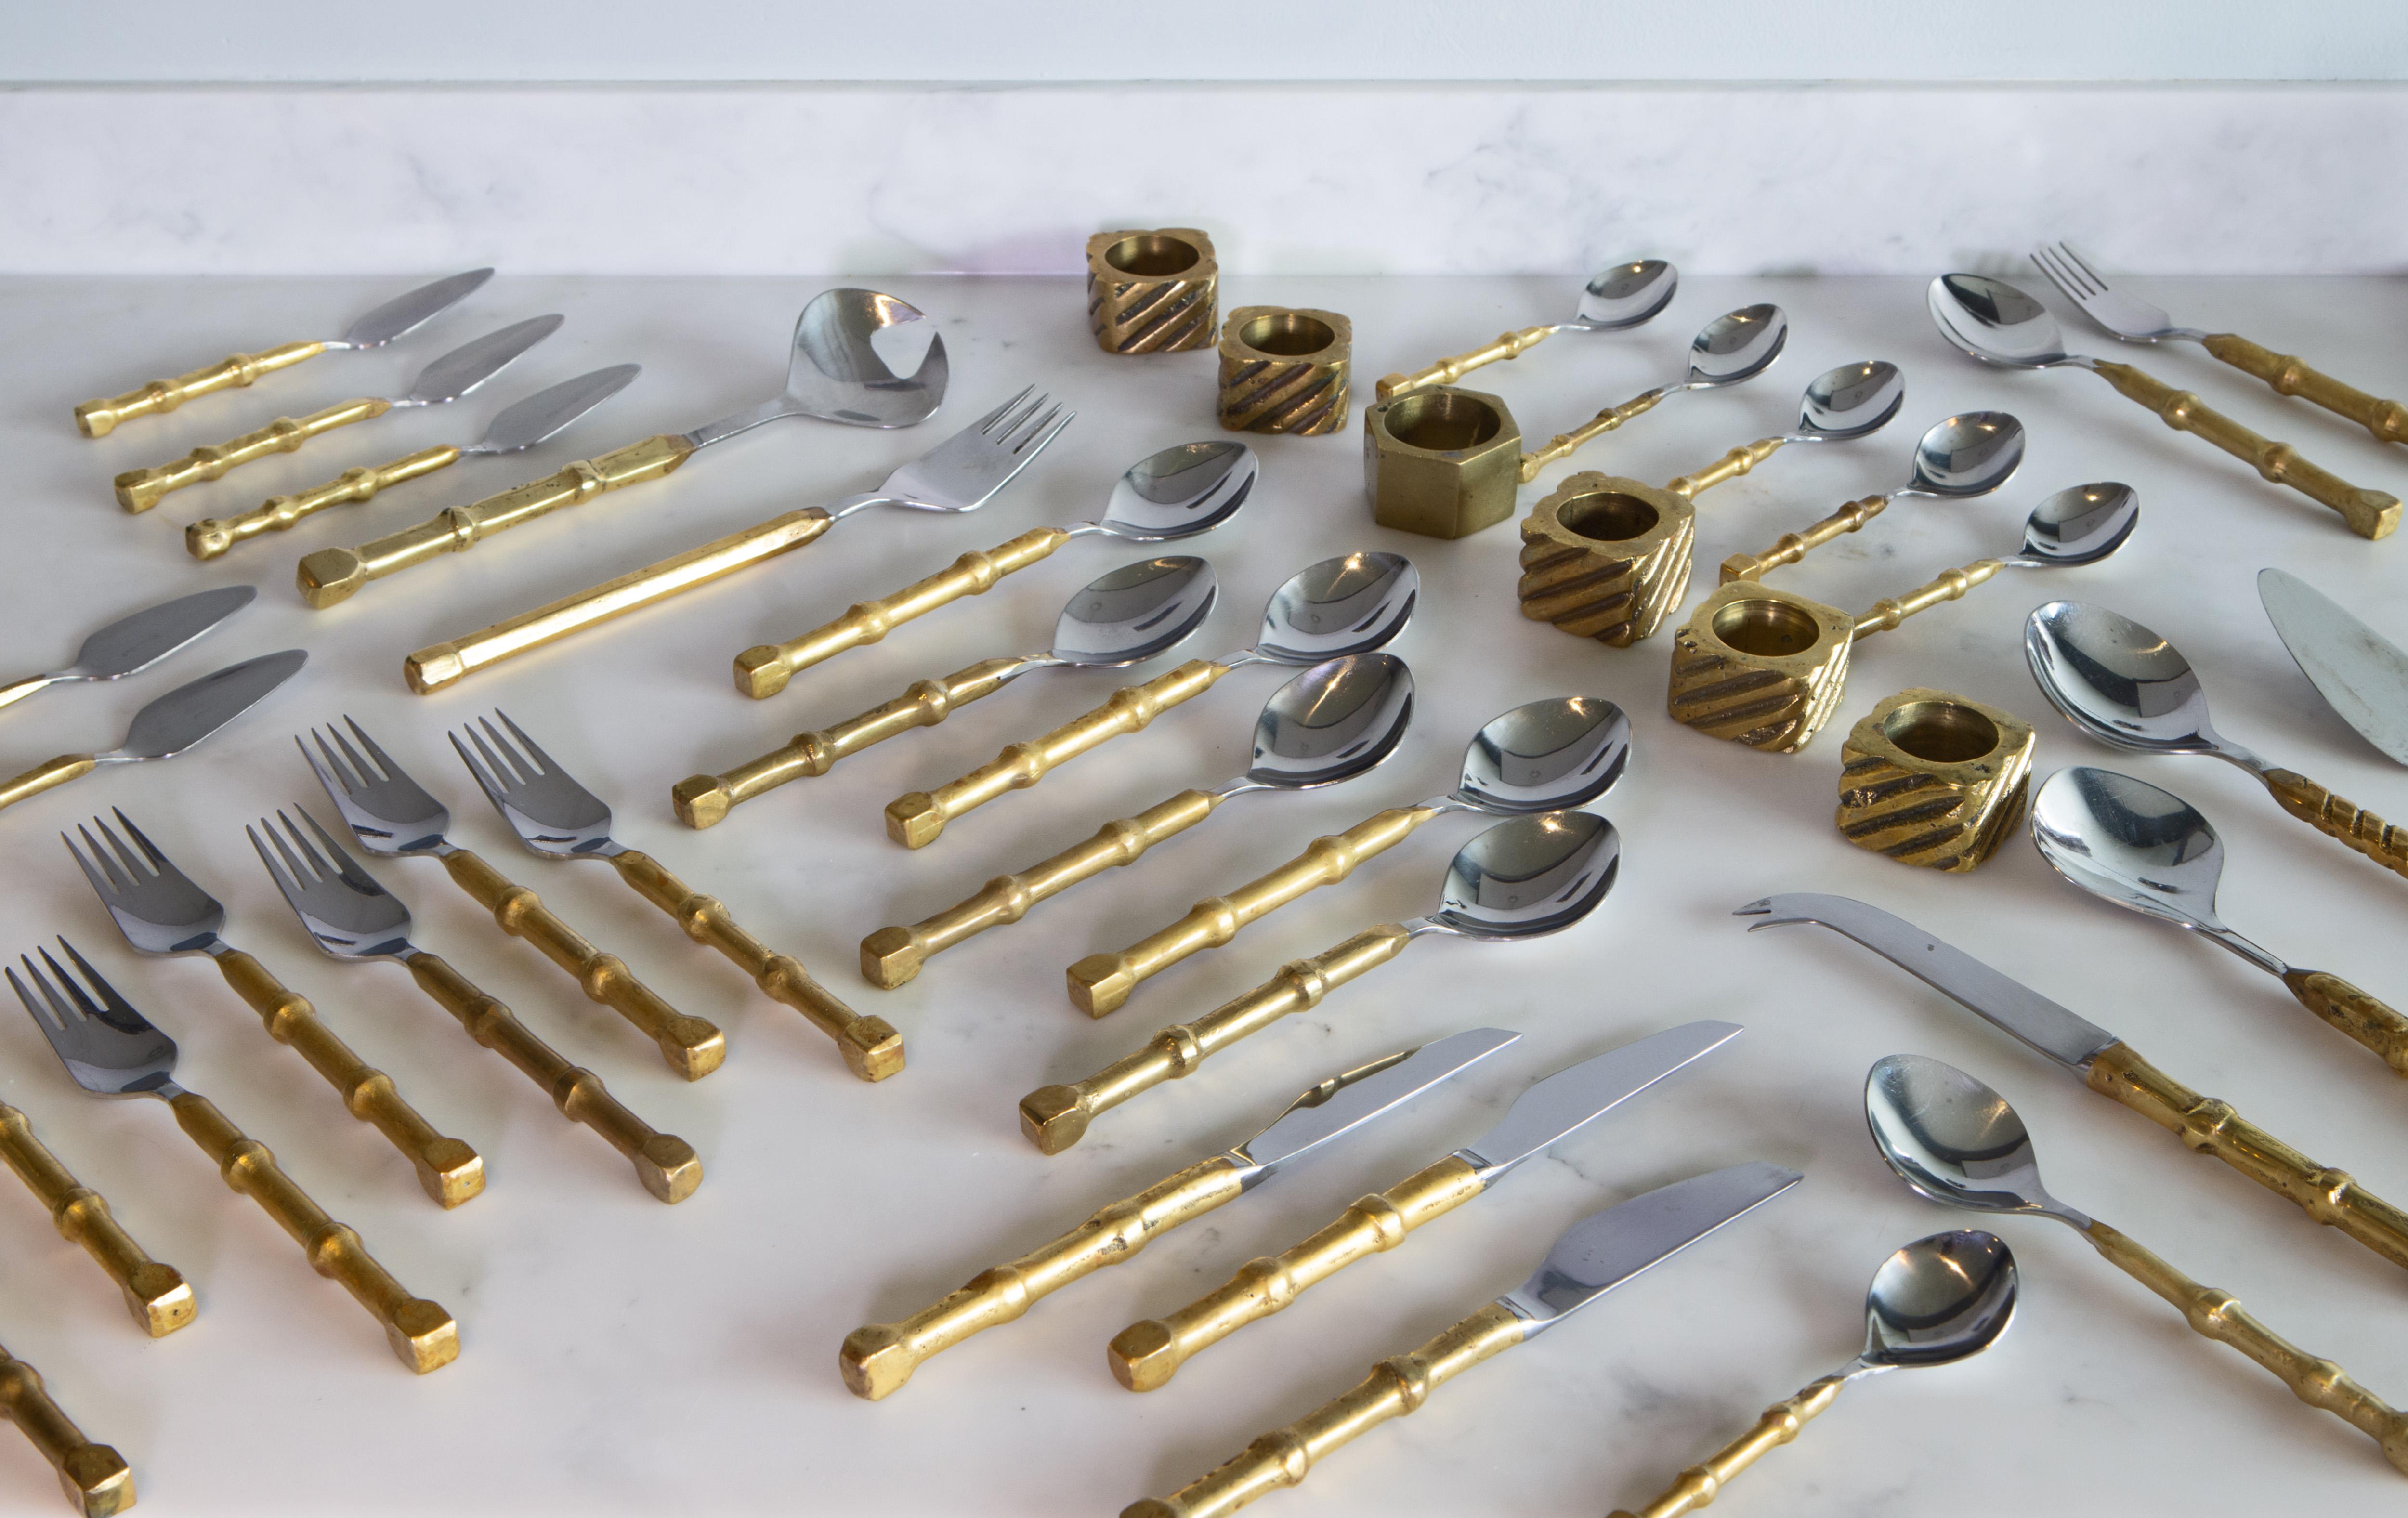 Vintage Brutalist 57 piece cutlery set/group, designed by renowned Scottish sculptor David Marshall (b.1942). Circa 1970-80s.

Cast brass and stainless steel. Demonstrating the sculptor's signature use of contrasting metals.

The Scottish sculptor